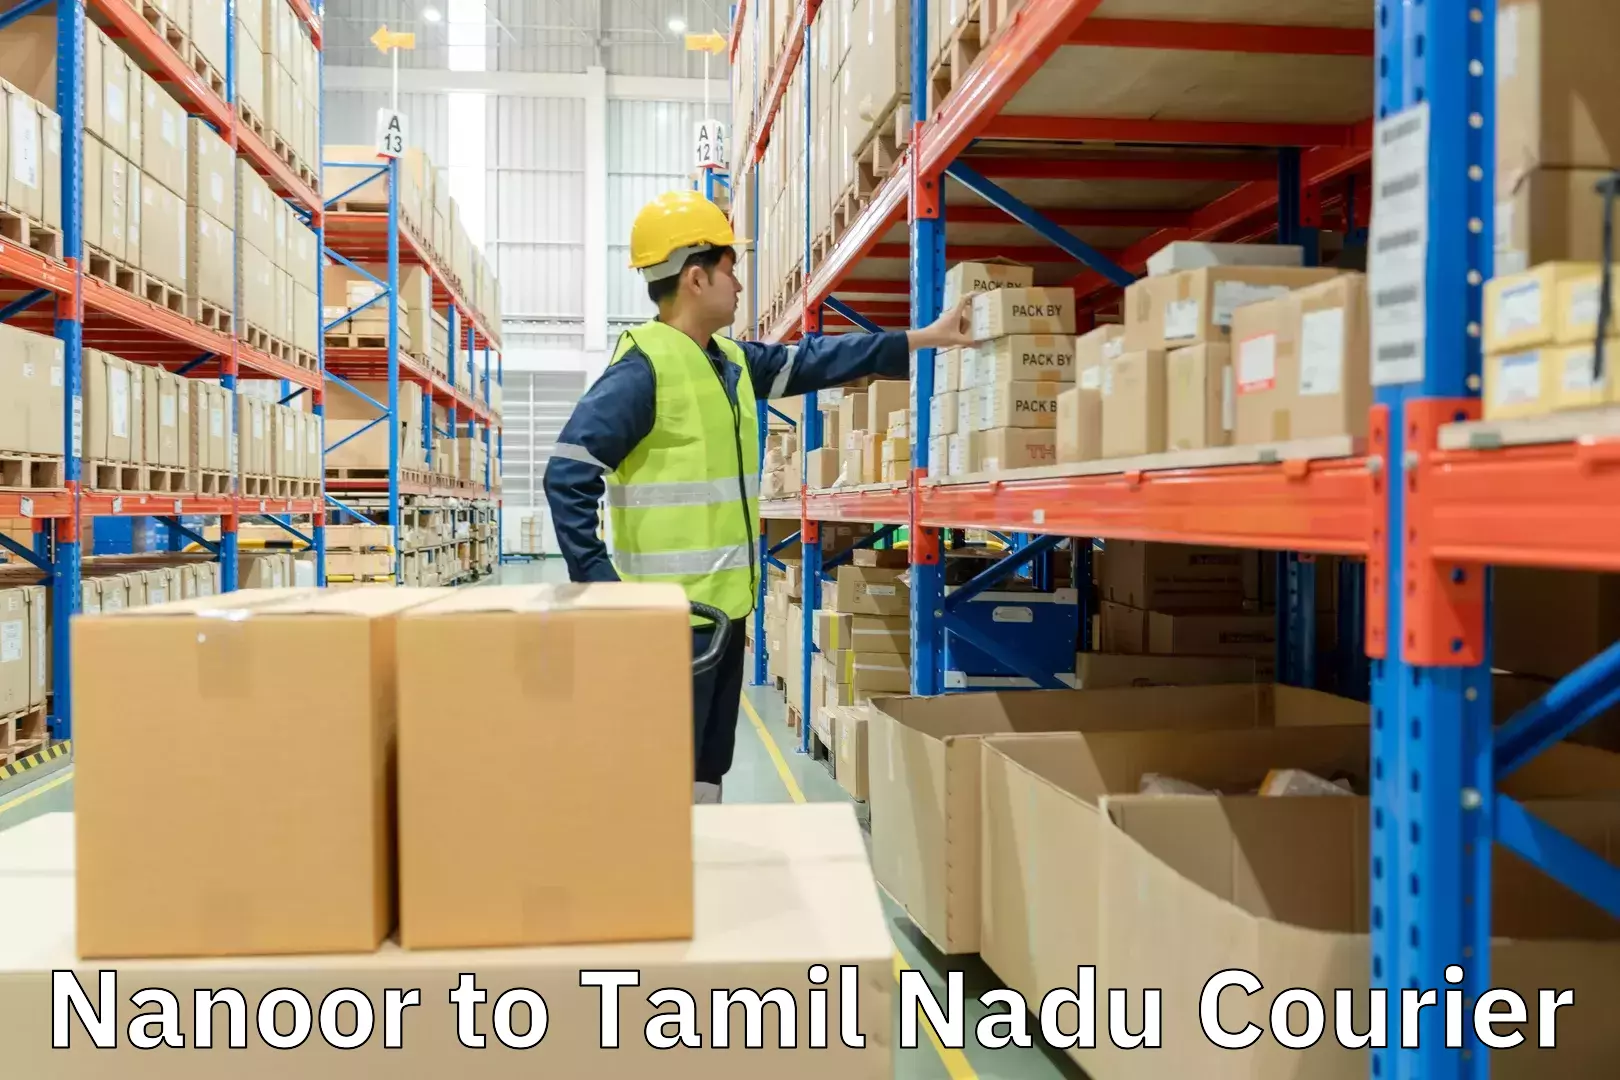 Fast delivery service Nanoor to Chennai Port